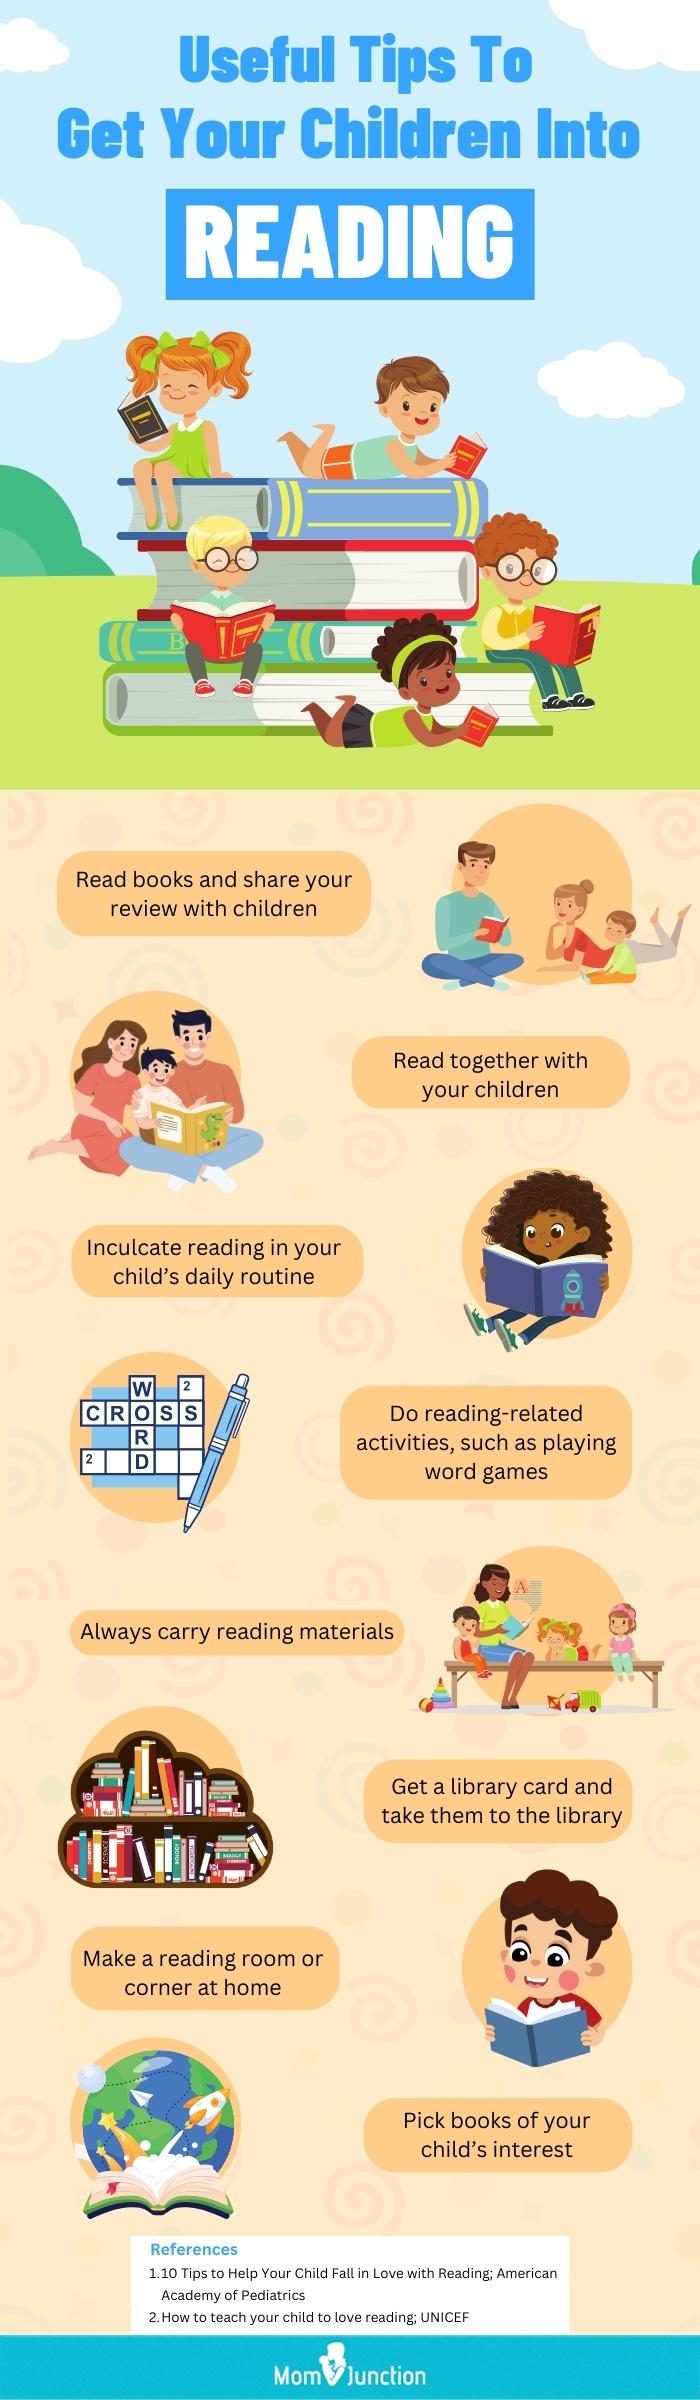 useful tips to get your children into reading (infographic)